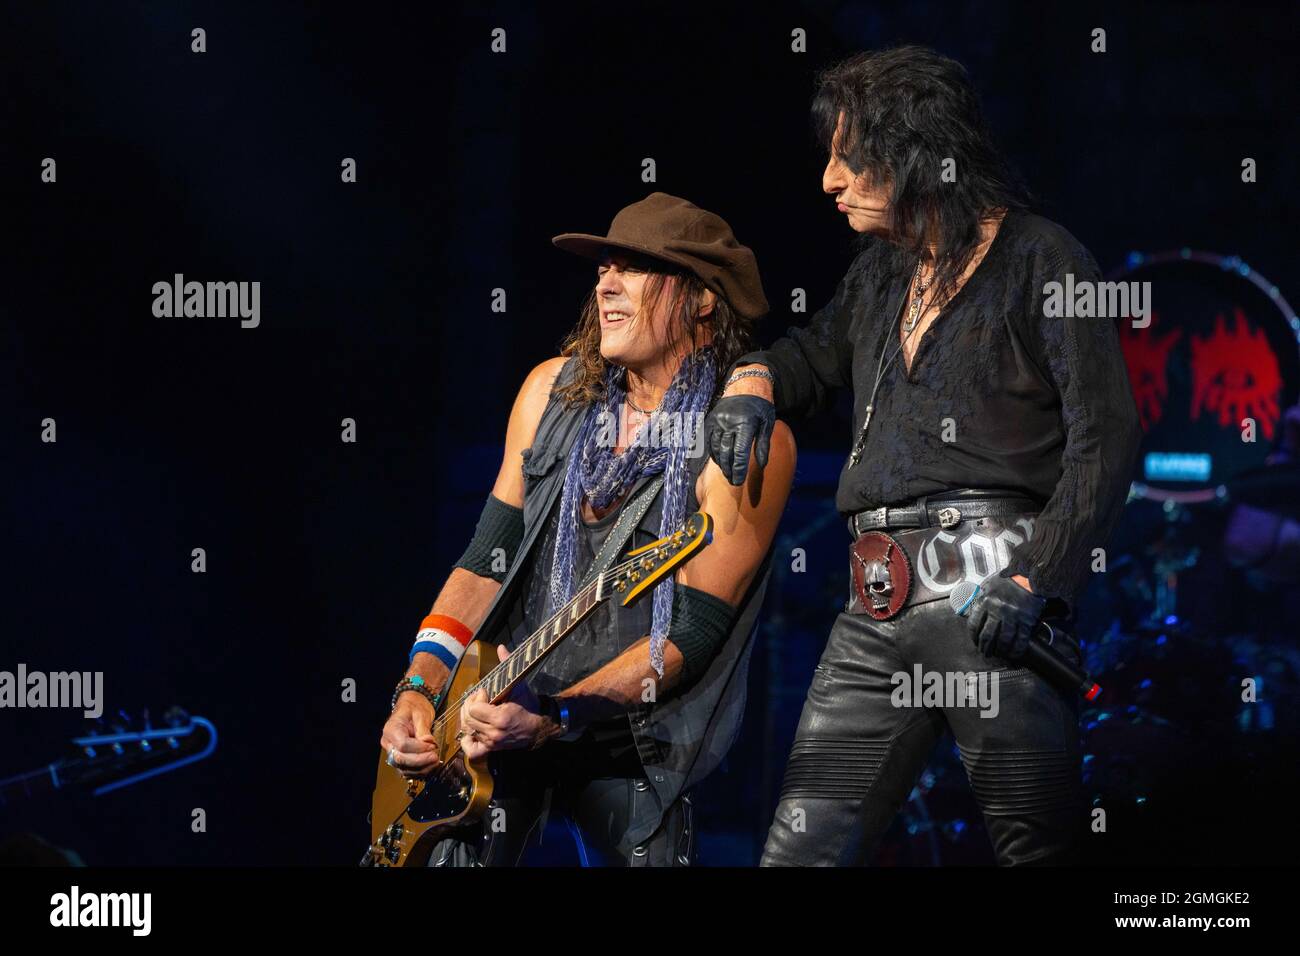 September 17, 2021, Atlantic City, New Jersey, USA: After nearly 19 months off stage, Rock and Roll legend ALICE COOPER (right), 73, launches his fall 2021 tour at Ocean Casino Resort in Atlantic City, New Jersey. Guitarist RYAN ROXIE is at left. (Credit Image: © Jim Z. Rider/ZUMA Press Wire) Stock Photo